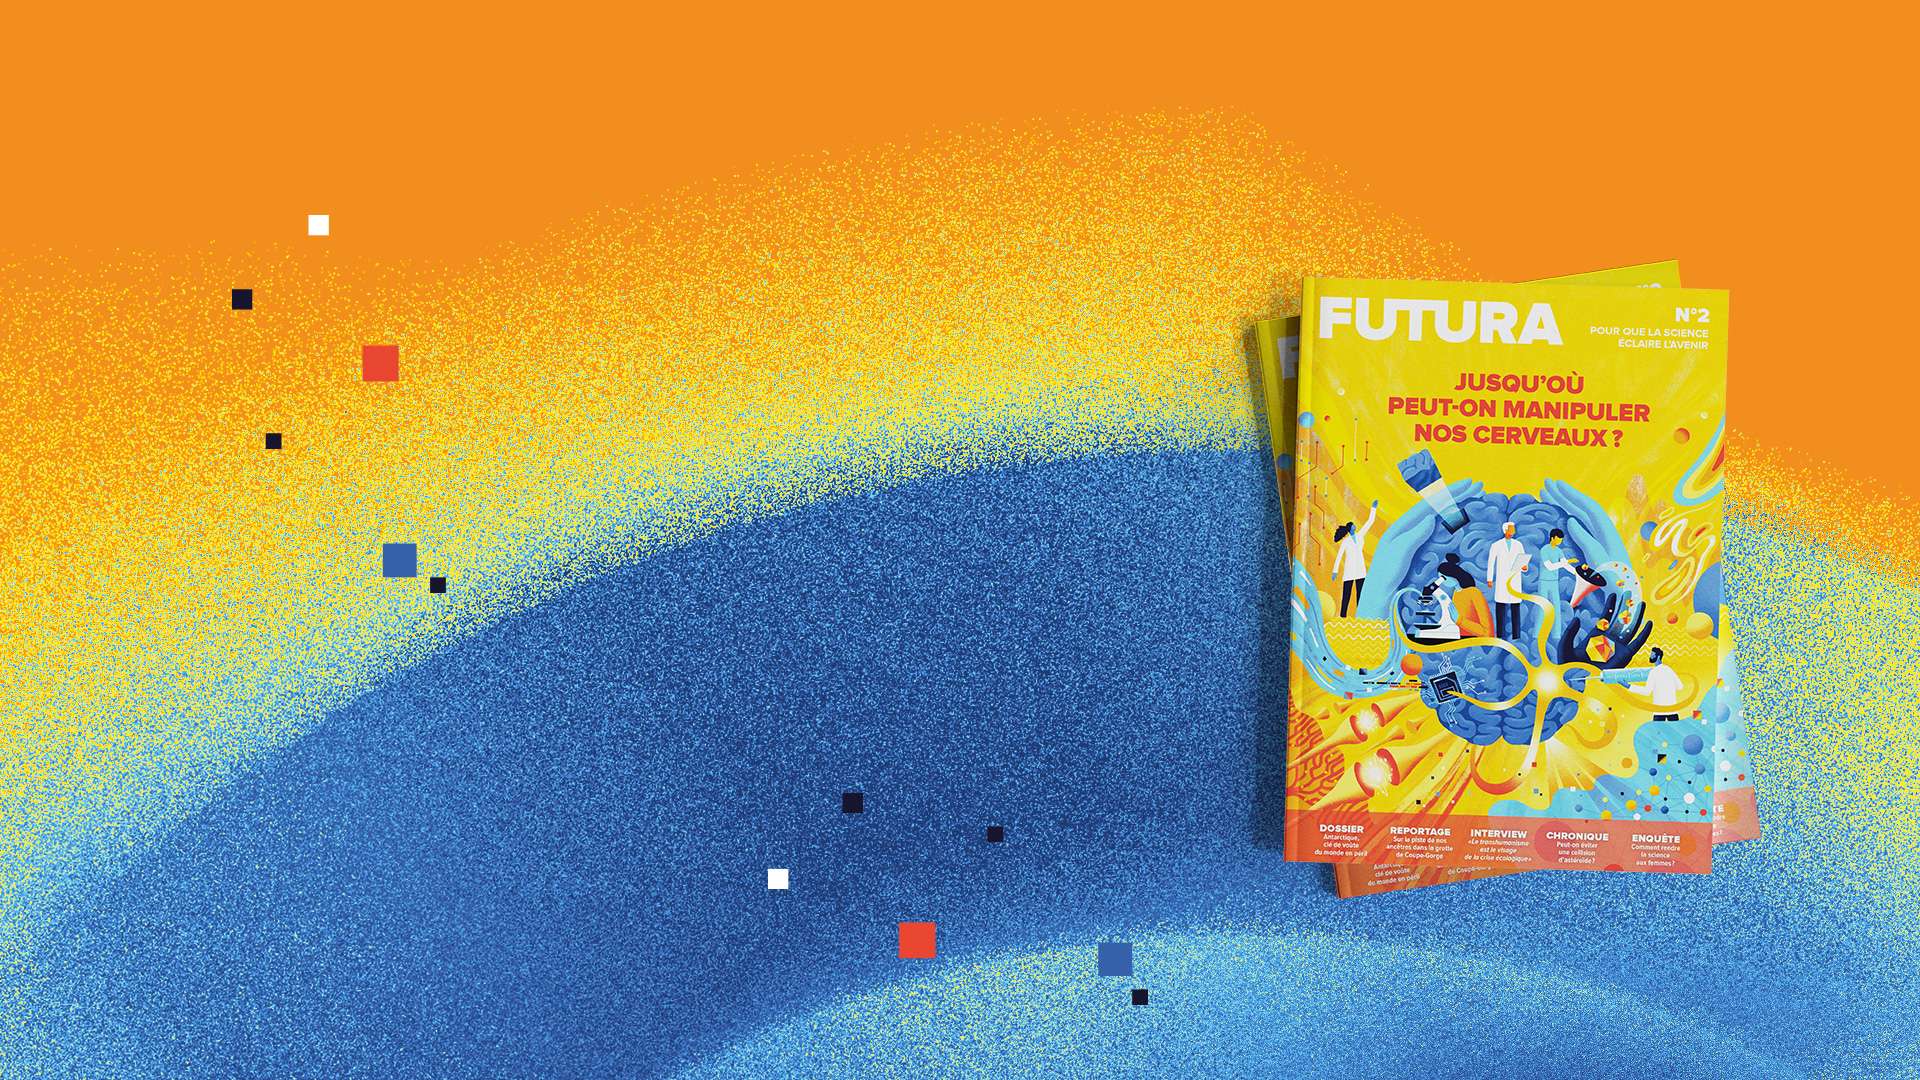 Final days to pre-order Mag’ Futura on Ulule!